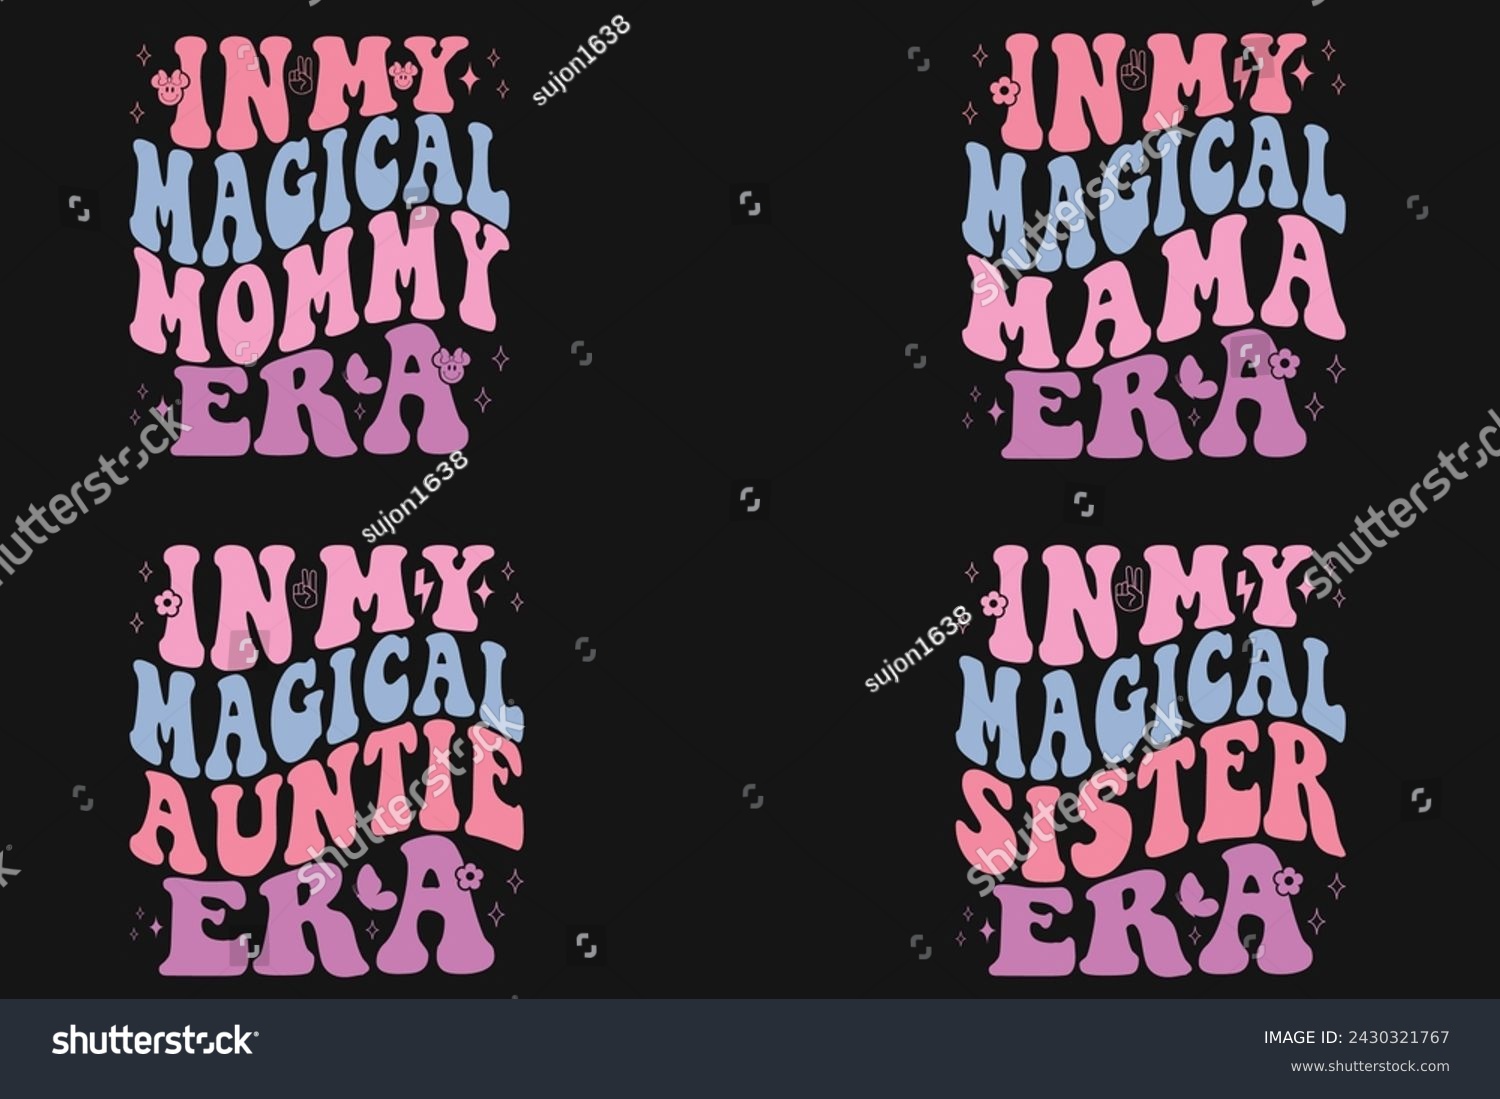 SVG of In My Magical Mommy Era, In My Magical mama Era, In My Magical auntie Era, In My Magical sister Era retro T-shirt svg